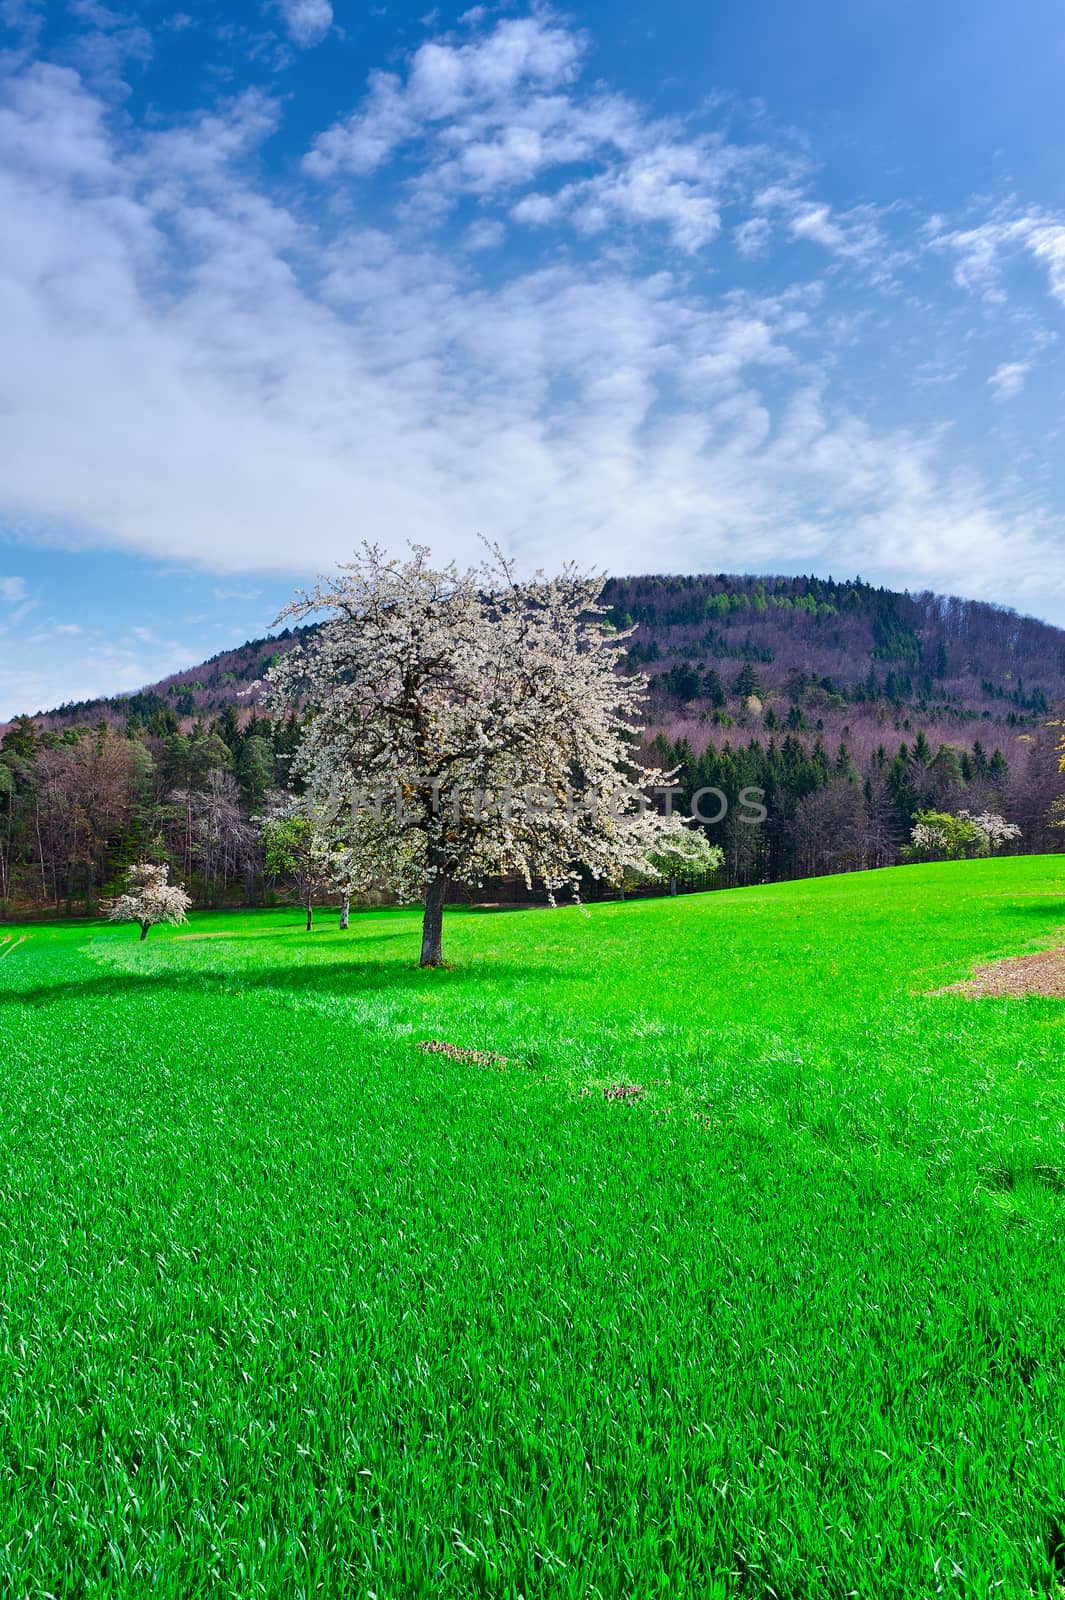 Flowering Trees Surrounded by Sloping Meadows in Switzerland